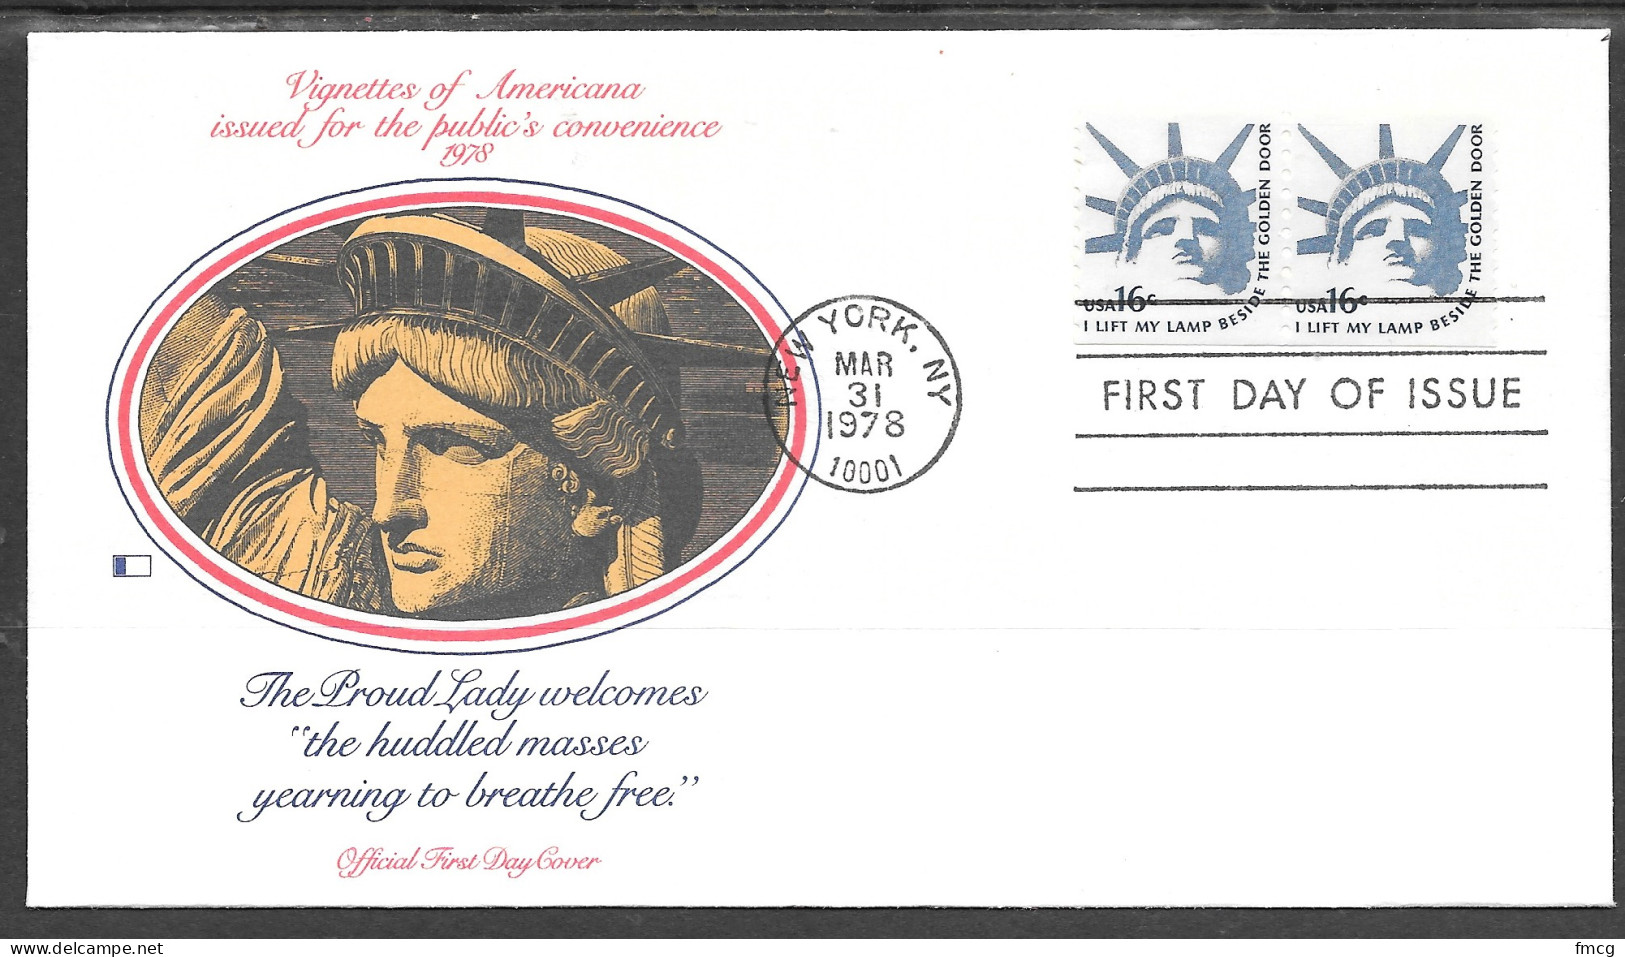 USA FDC Fleetwood Cachet, 16 Cents Statue Of Liberty, Coil Stamp - 1971-1980